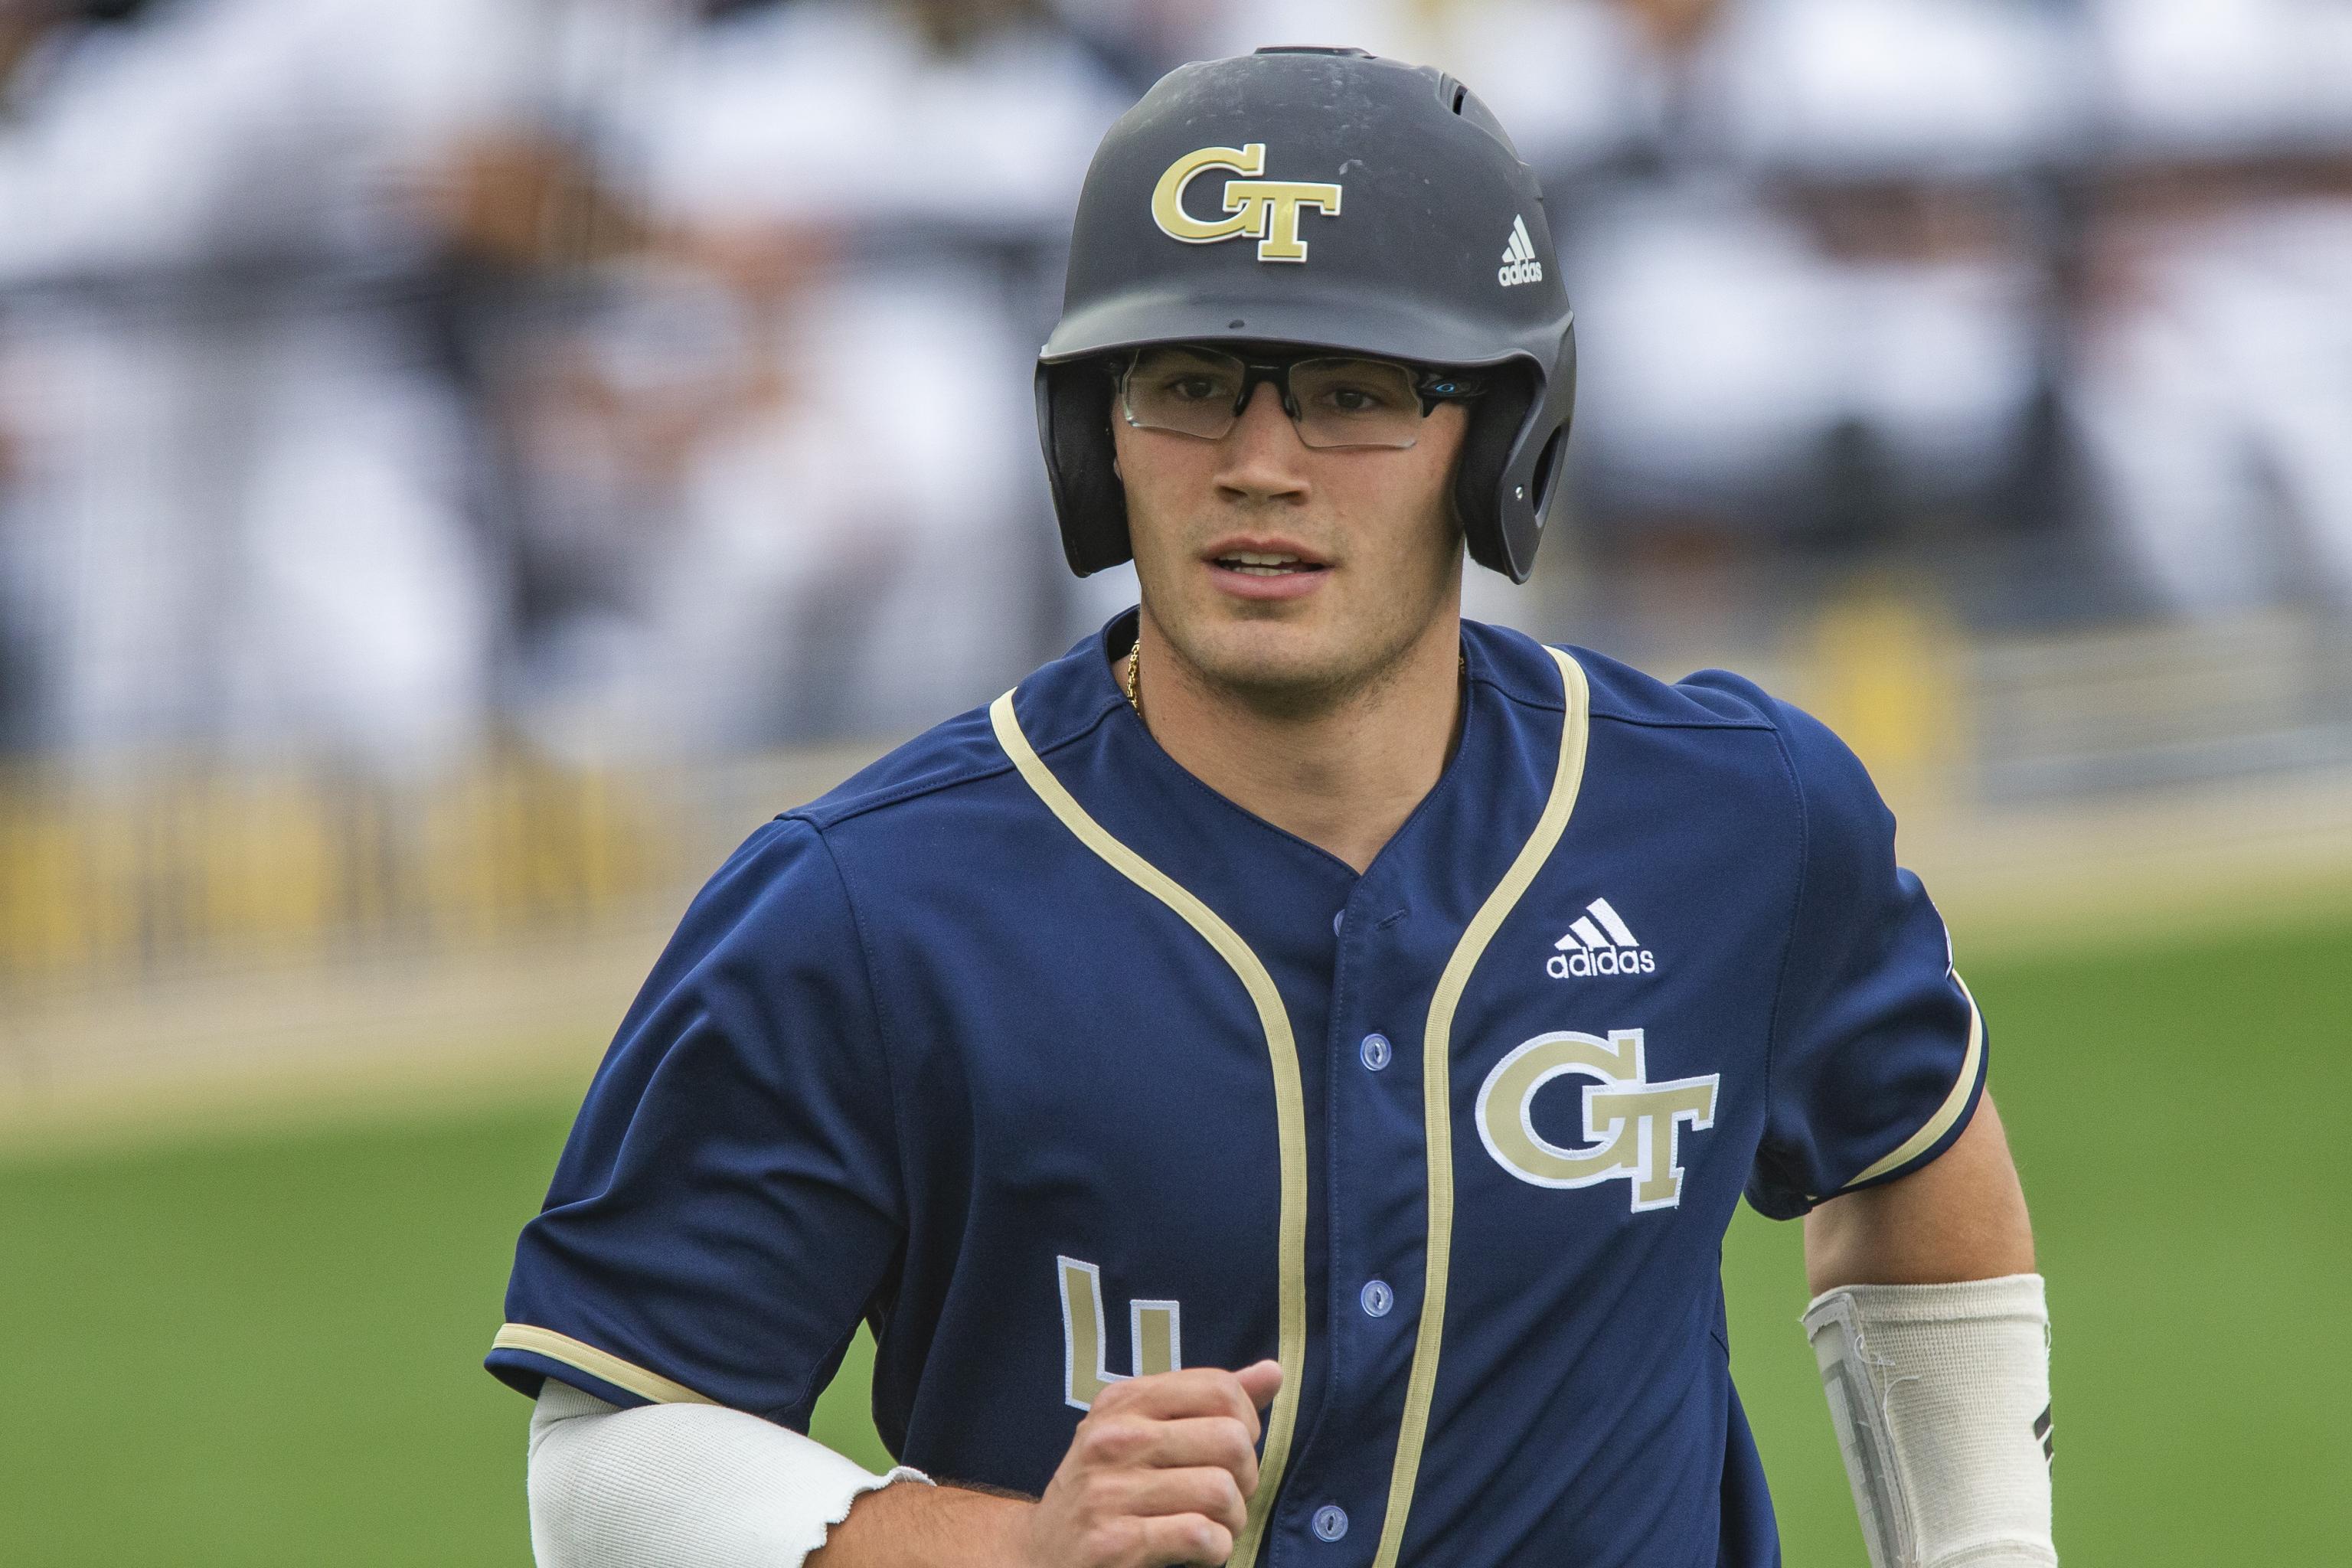 North Allegheny's Cole Young projected as 1st-round pick in MLB